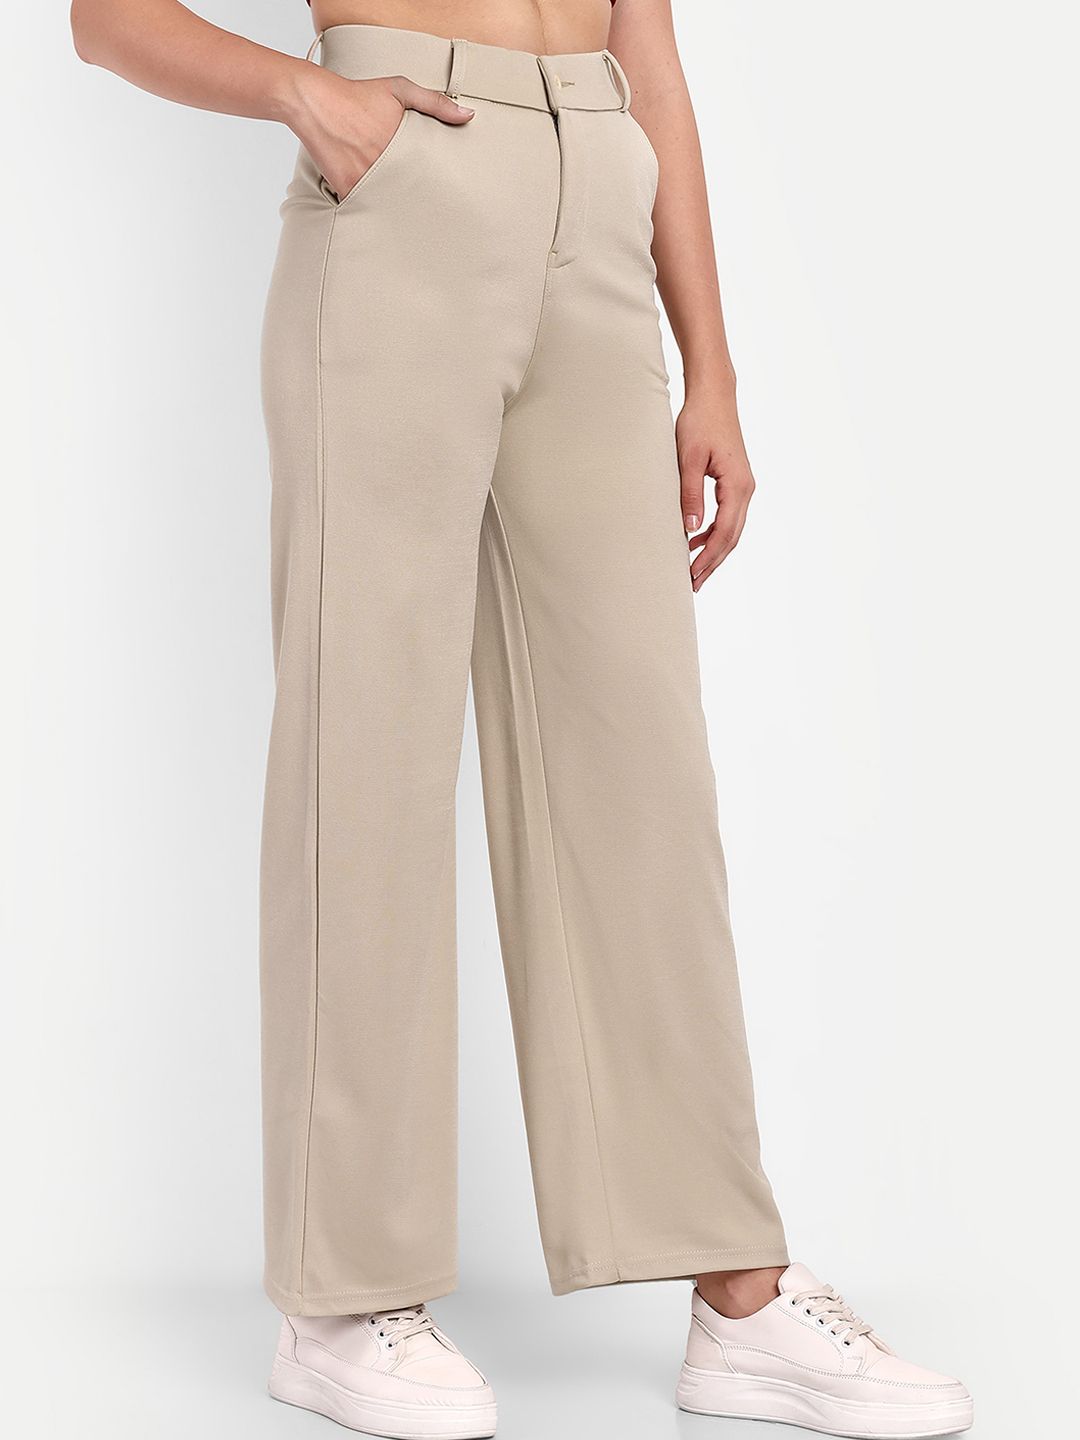 Next One Women Smart Loose Fit High-Rise Easy Wash Stretchable Parallel Trousers Price in India